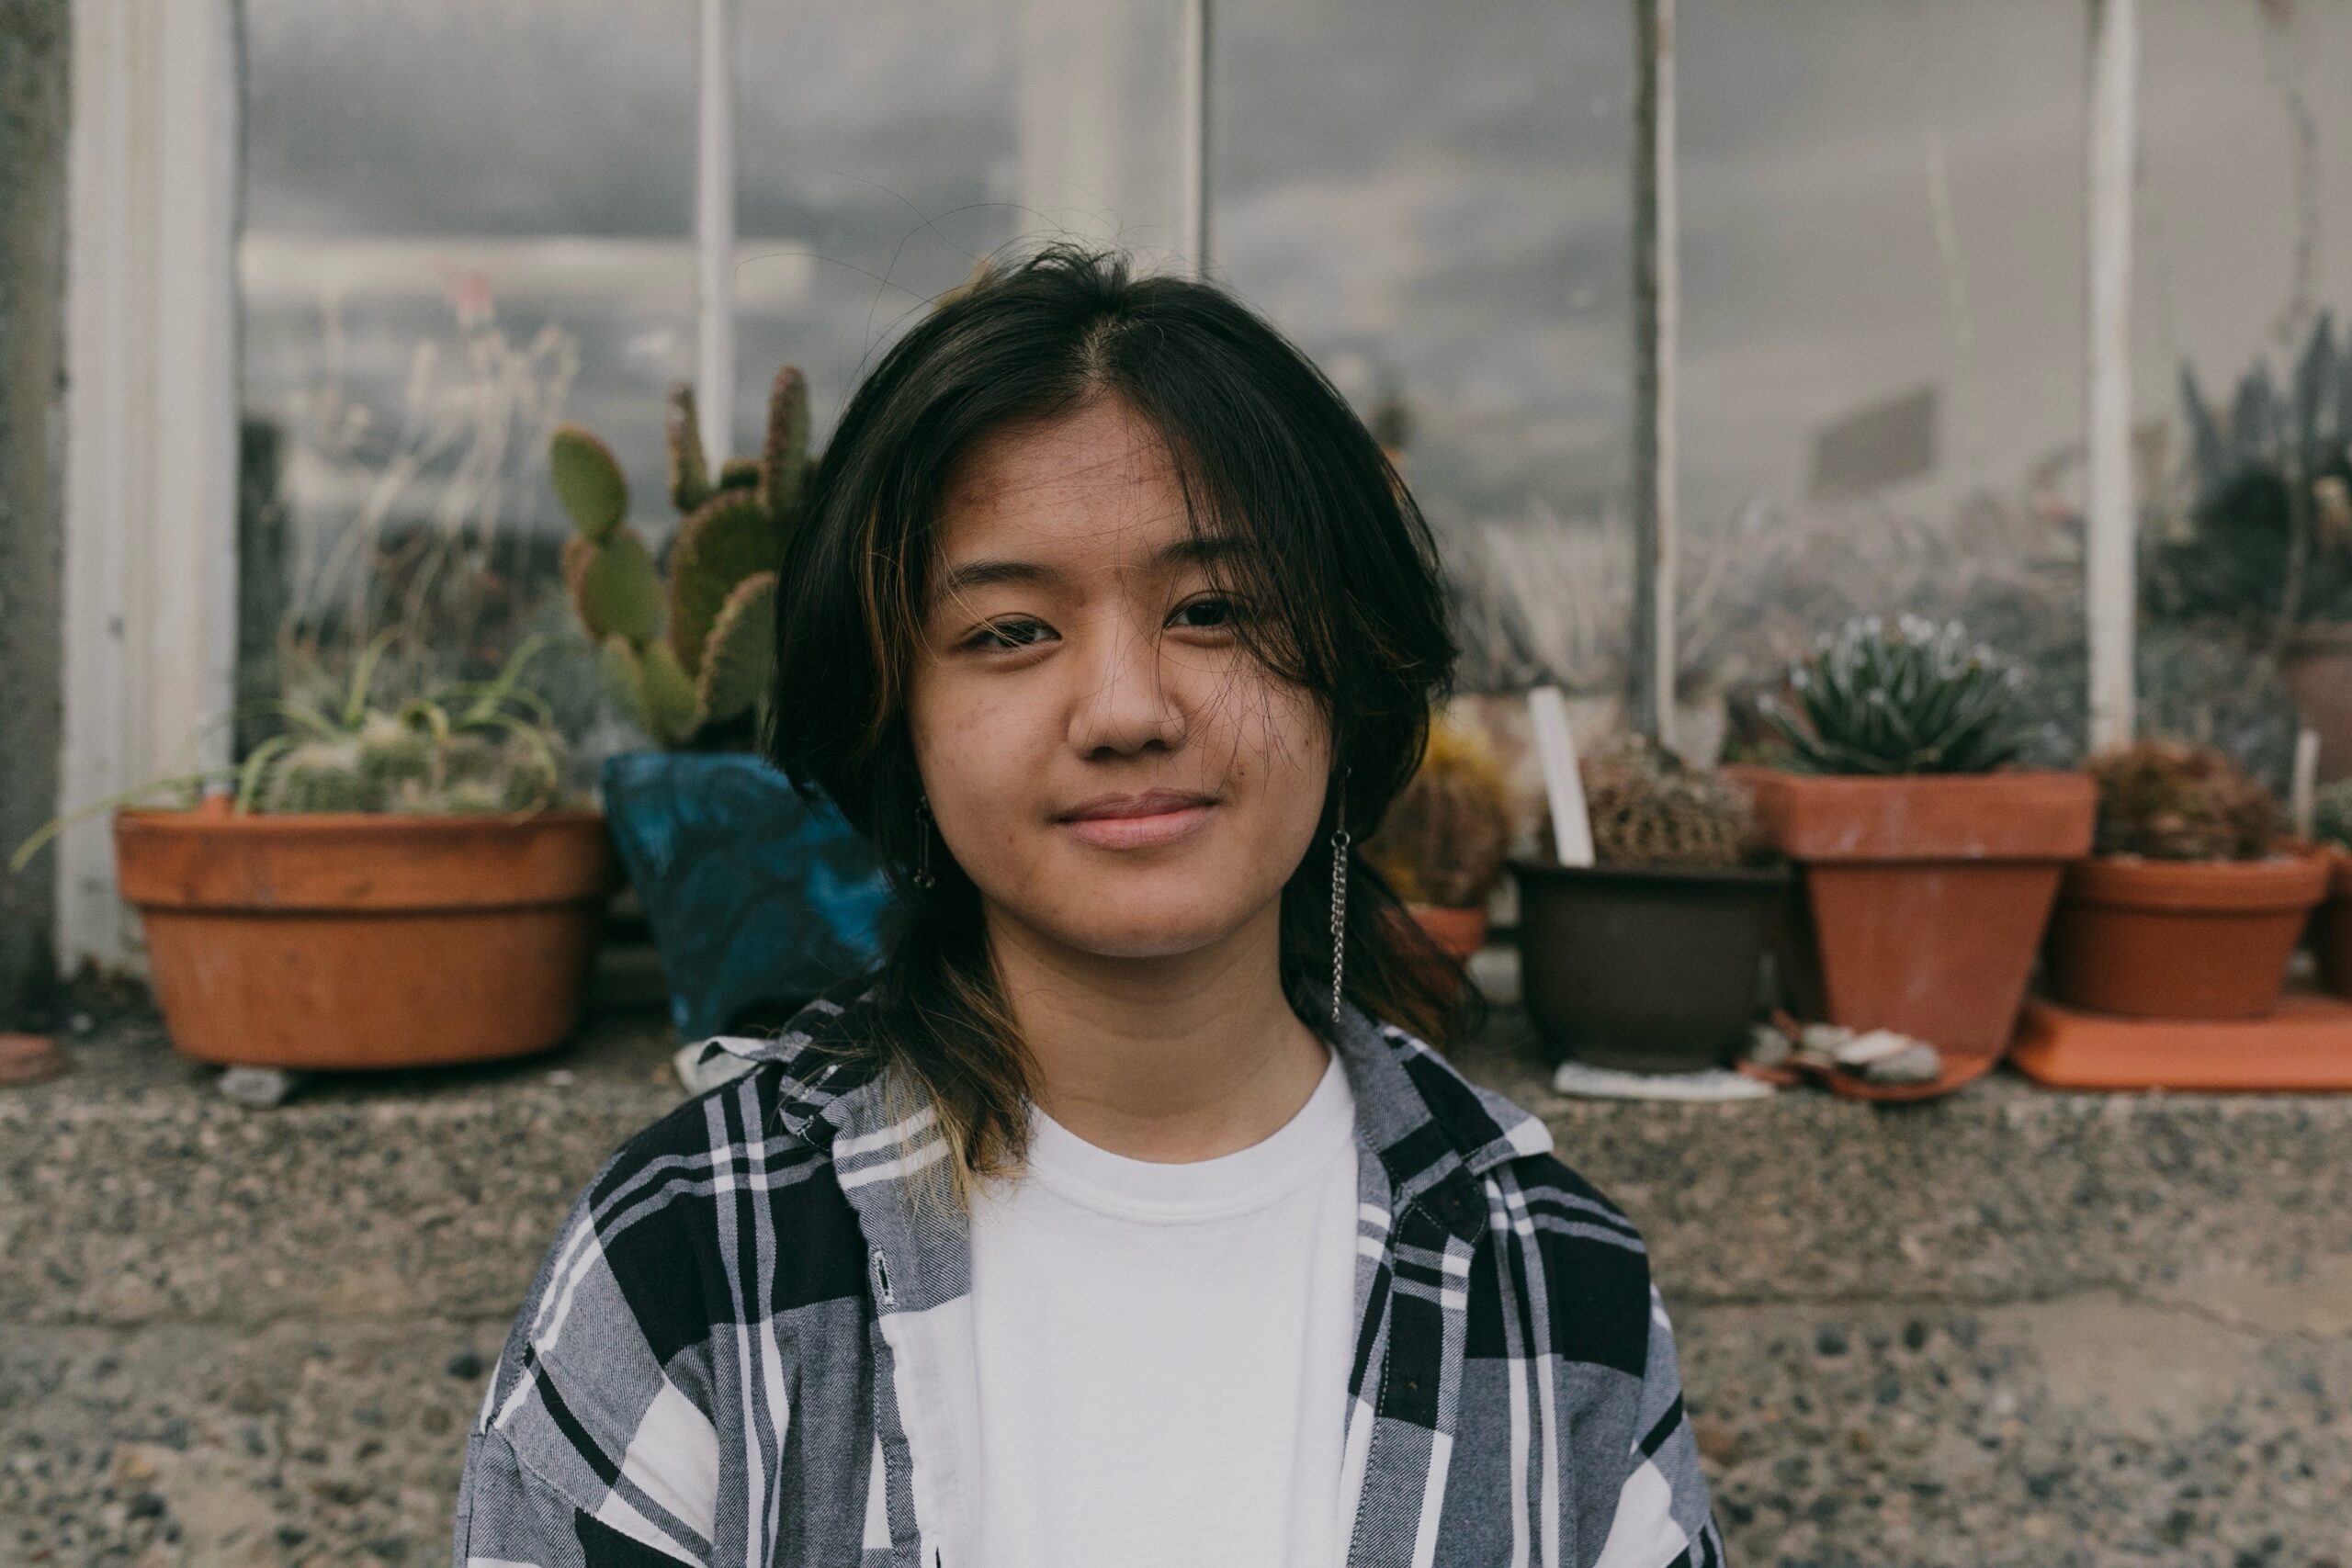 Student Mica Viacrucis, a teenager with dark shoulder-length hair, wearing a flannel in front of potted succulents